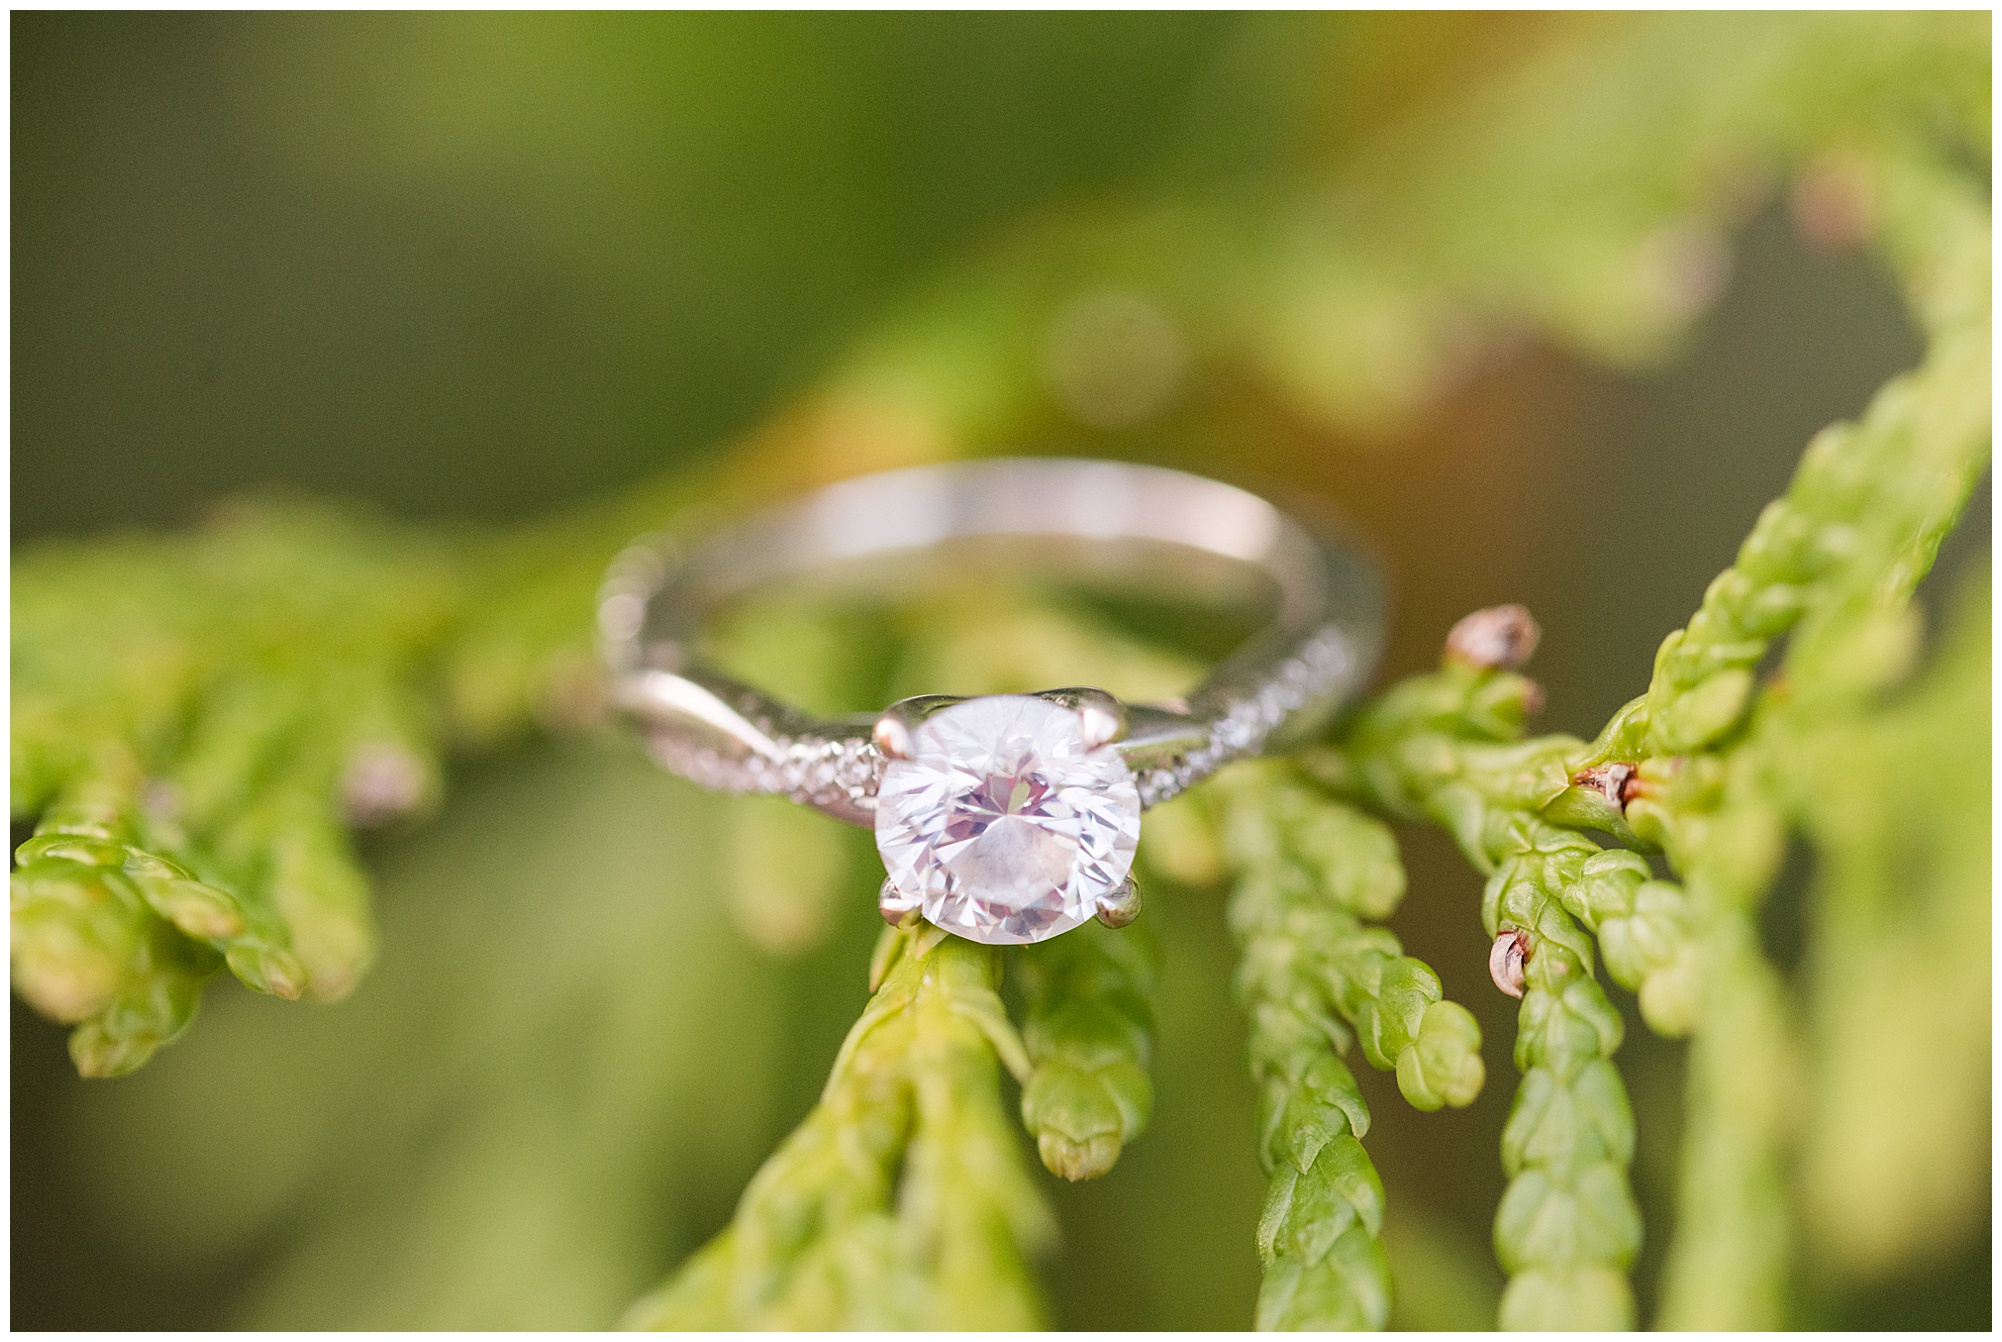 wedding ring photo outdoor with green greenery background on tree branch leaves in the spring. inspiration.